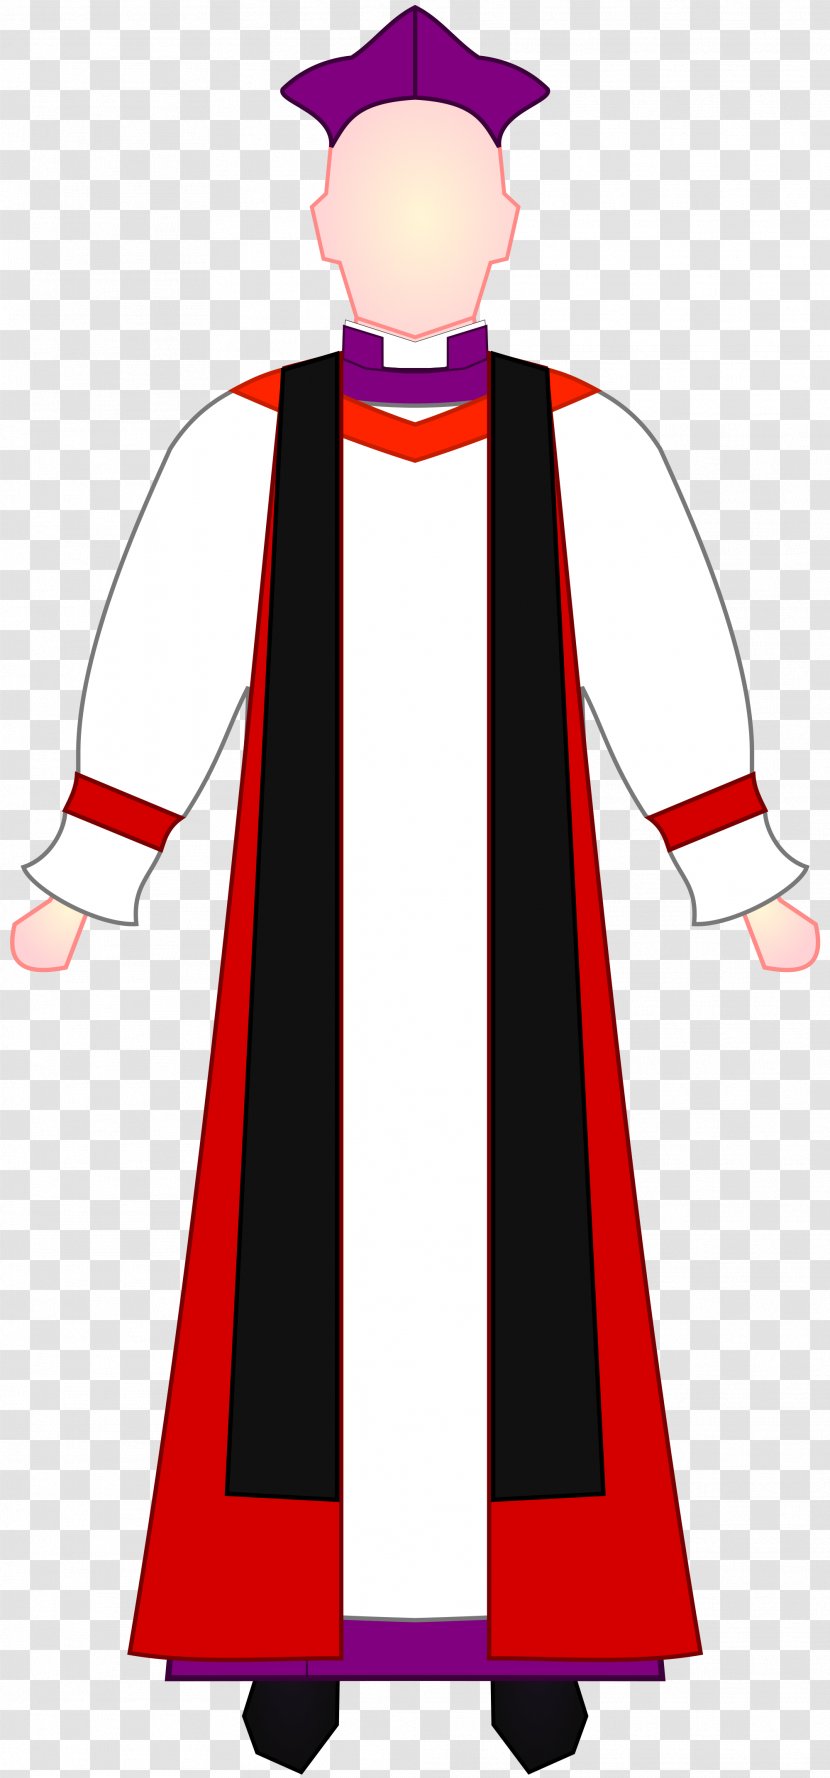 Choir Dress Robe Clothing Bishop - Deacon - Red Transparent PNG